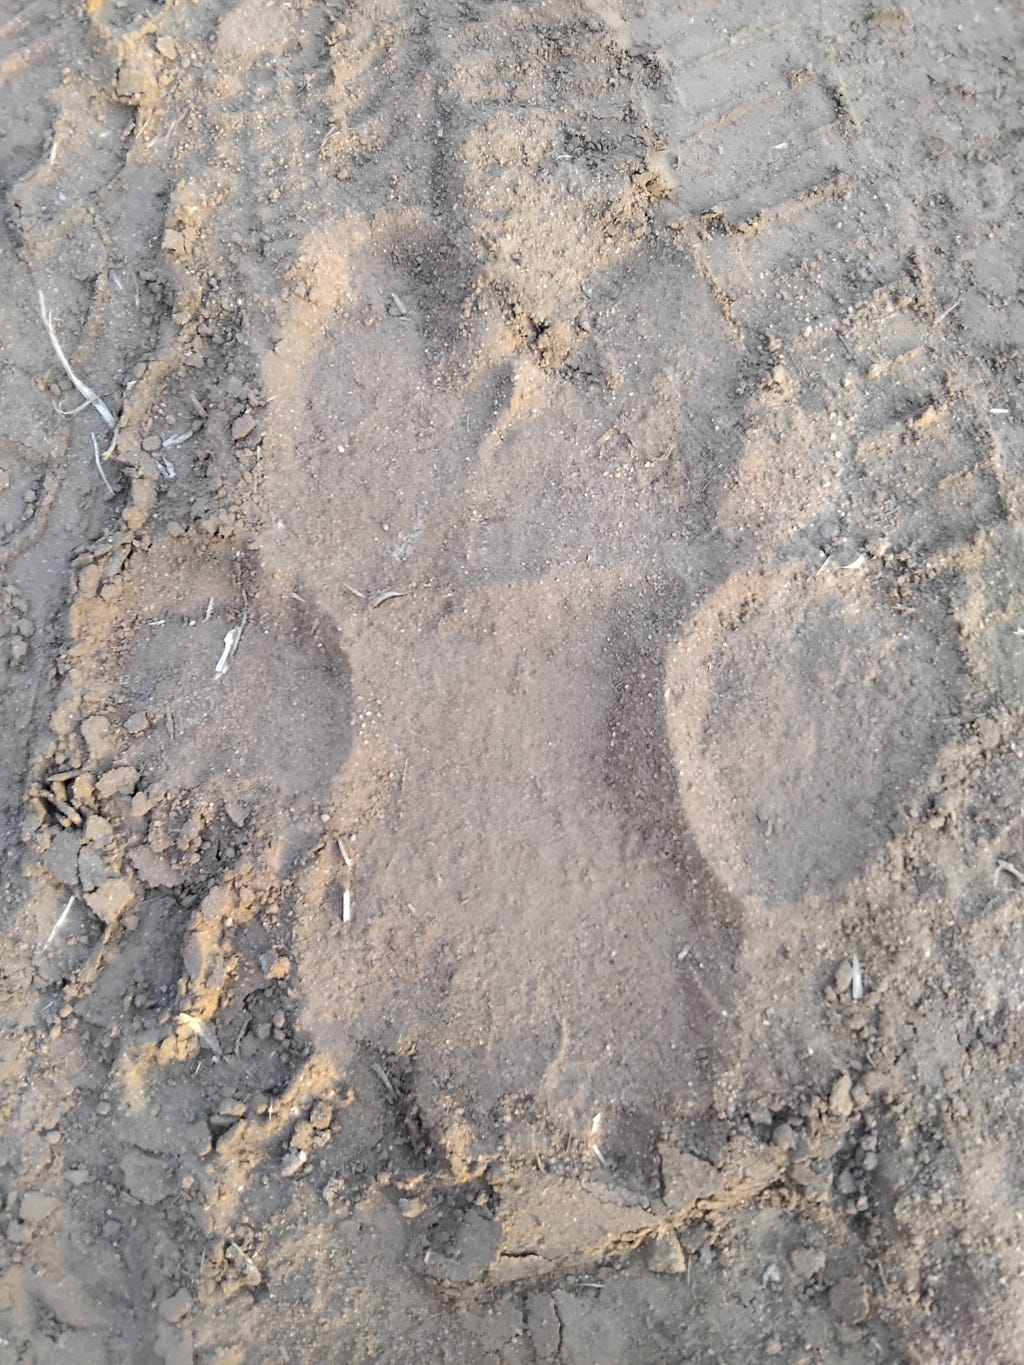 A close up of a large hippo track imprinted on dusty soil